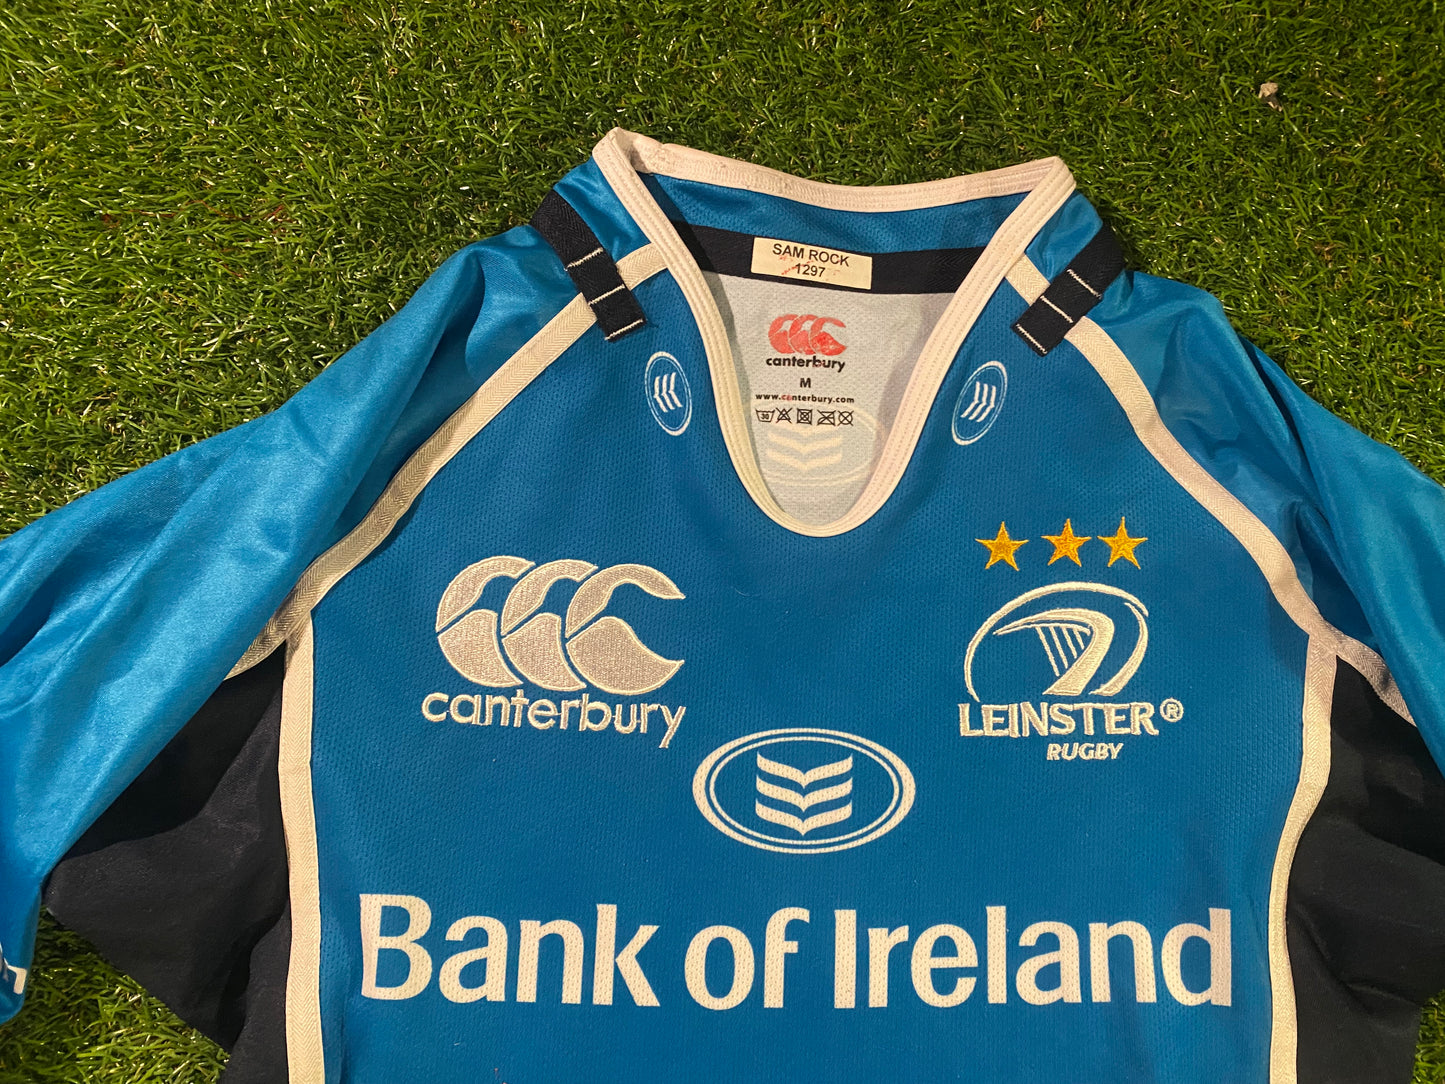 Leinster Eire Irish Ireland Rugby Union Football Medium Mans Tight Fit Player Issued Jersey